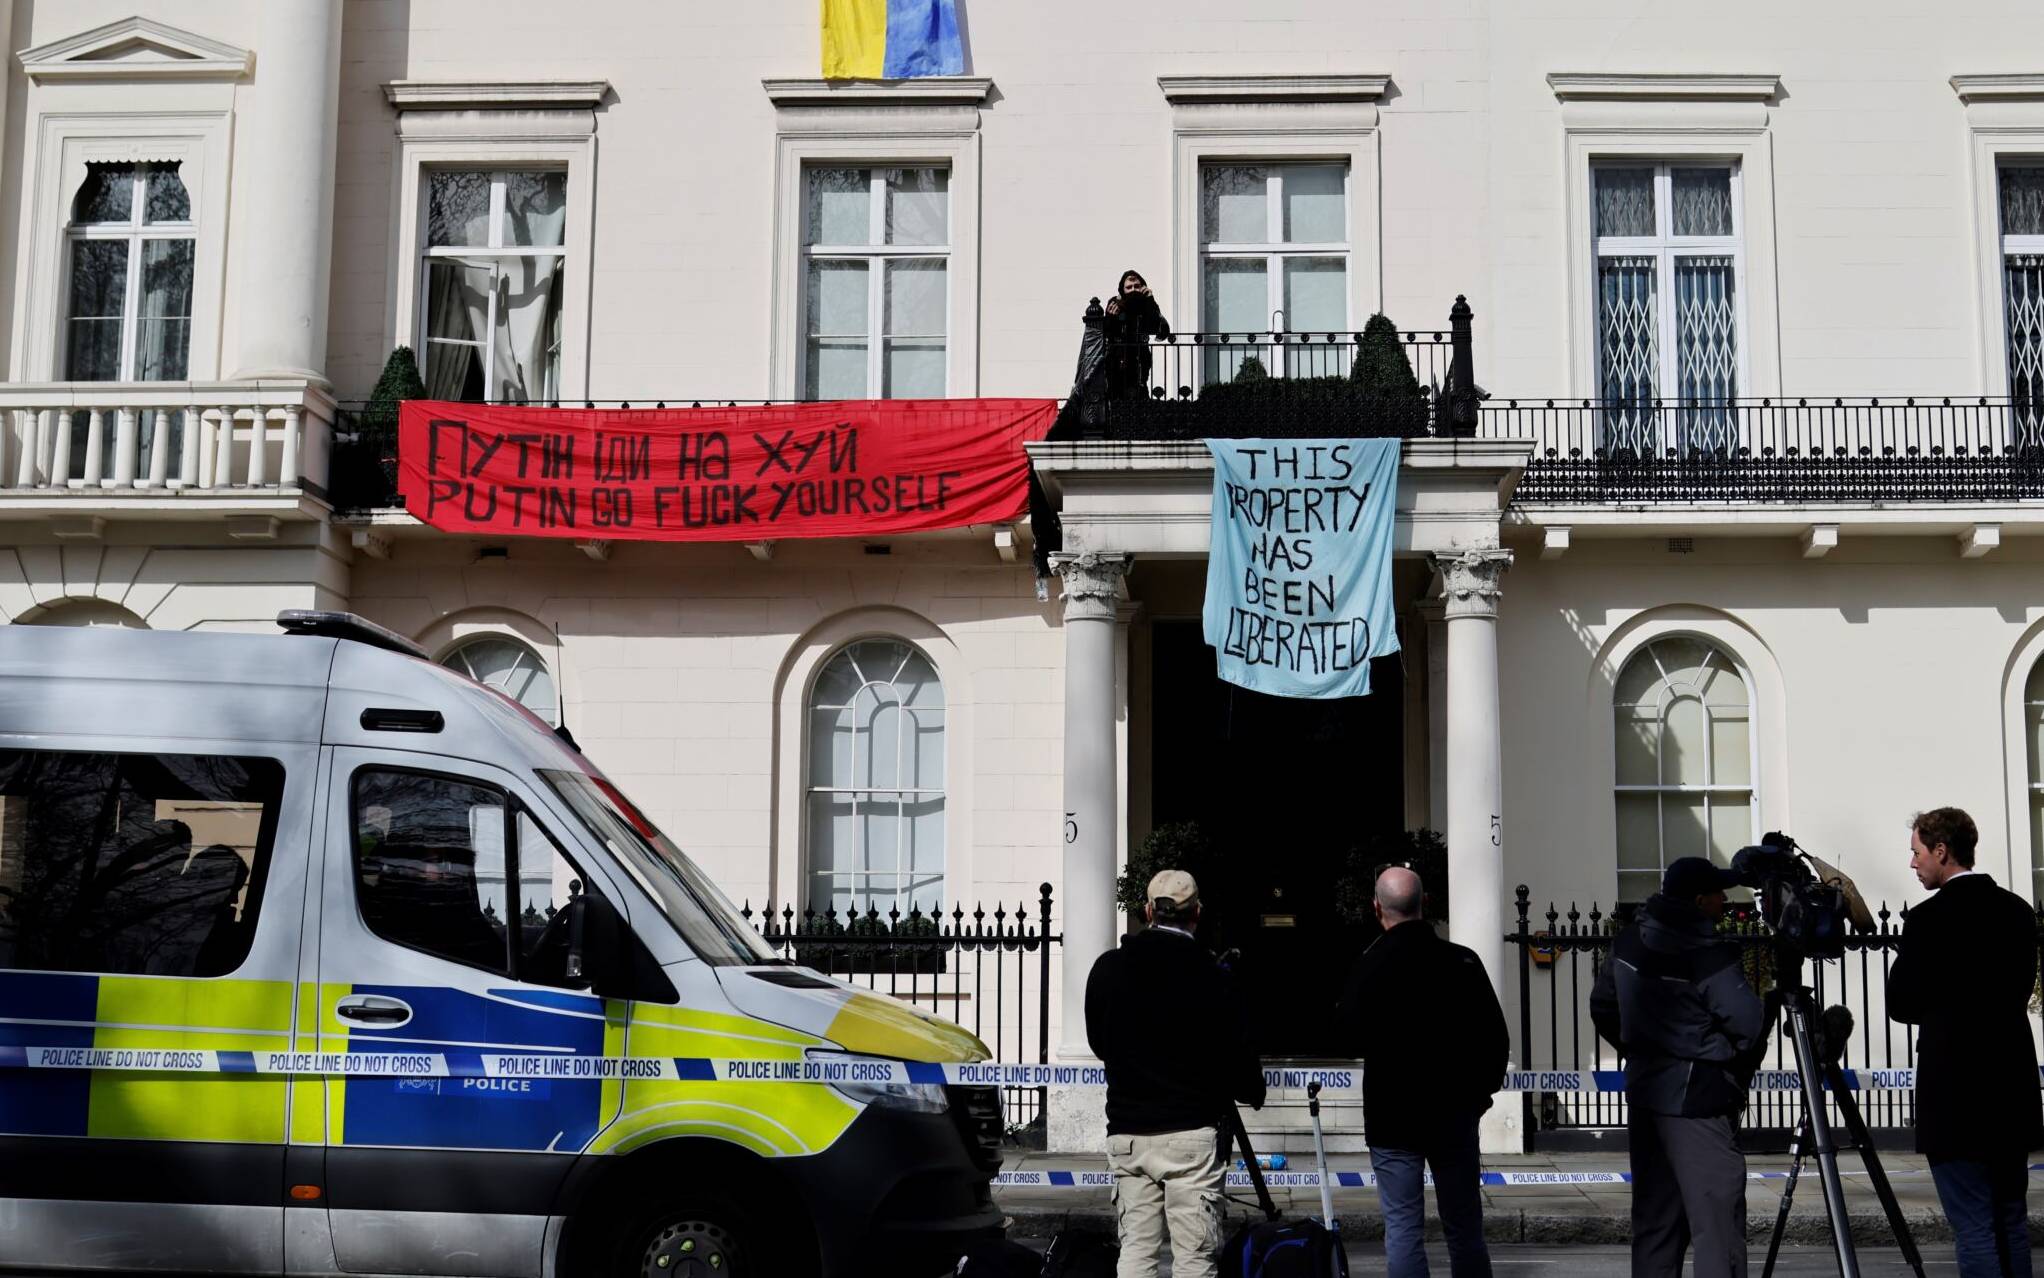 Journalists and police officers arrive at a mansion supposedly belonging to Russian oligarch Oleg Deripaska in Belgrave Square, central London, on March 14, 2022 that is occupied by a group of squatters. - Oleg Deripaska is one of the seven Russian oligarchs who have been sanctioned by Britain's   Government. (Photo by Tolga Akmen / AFP)